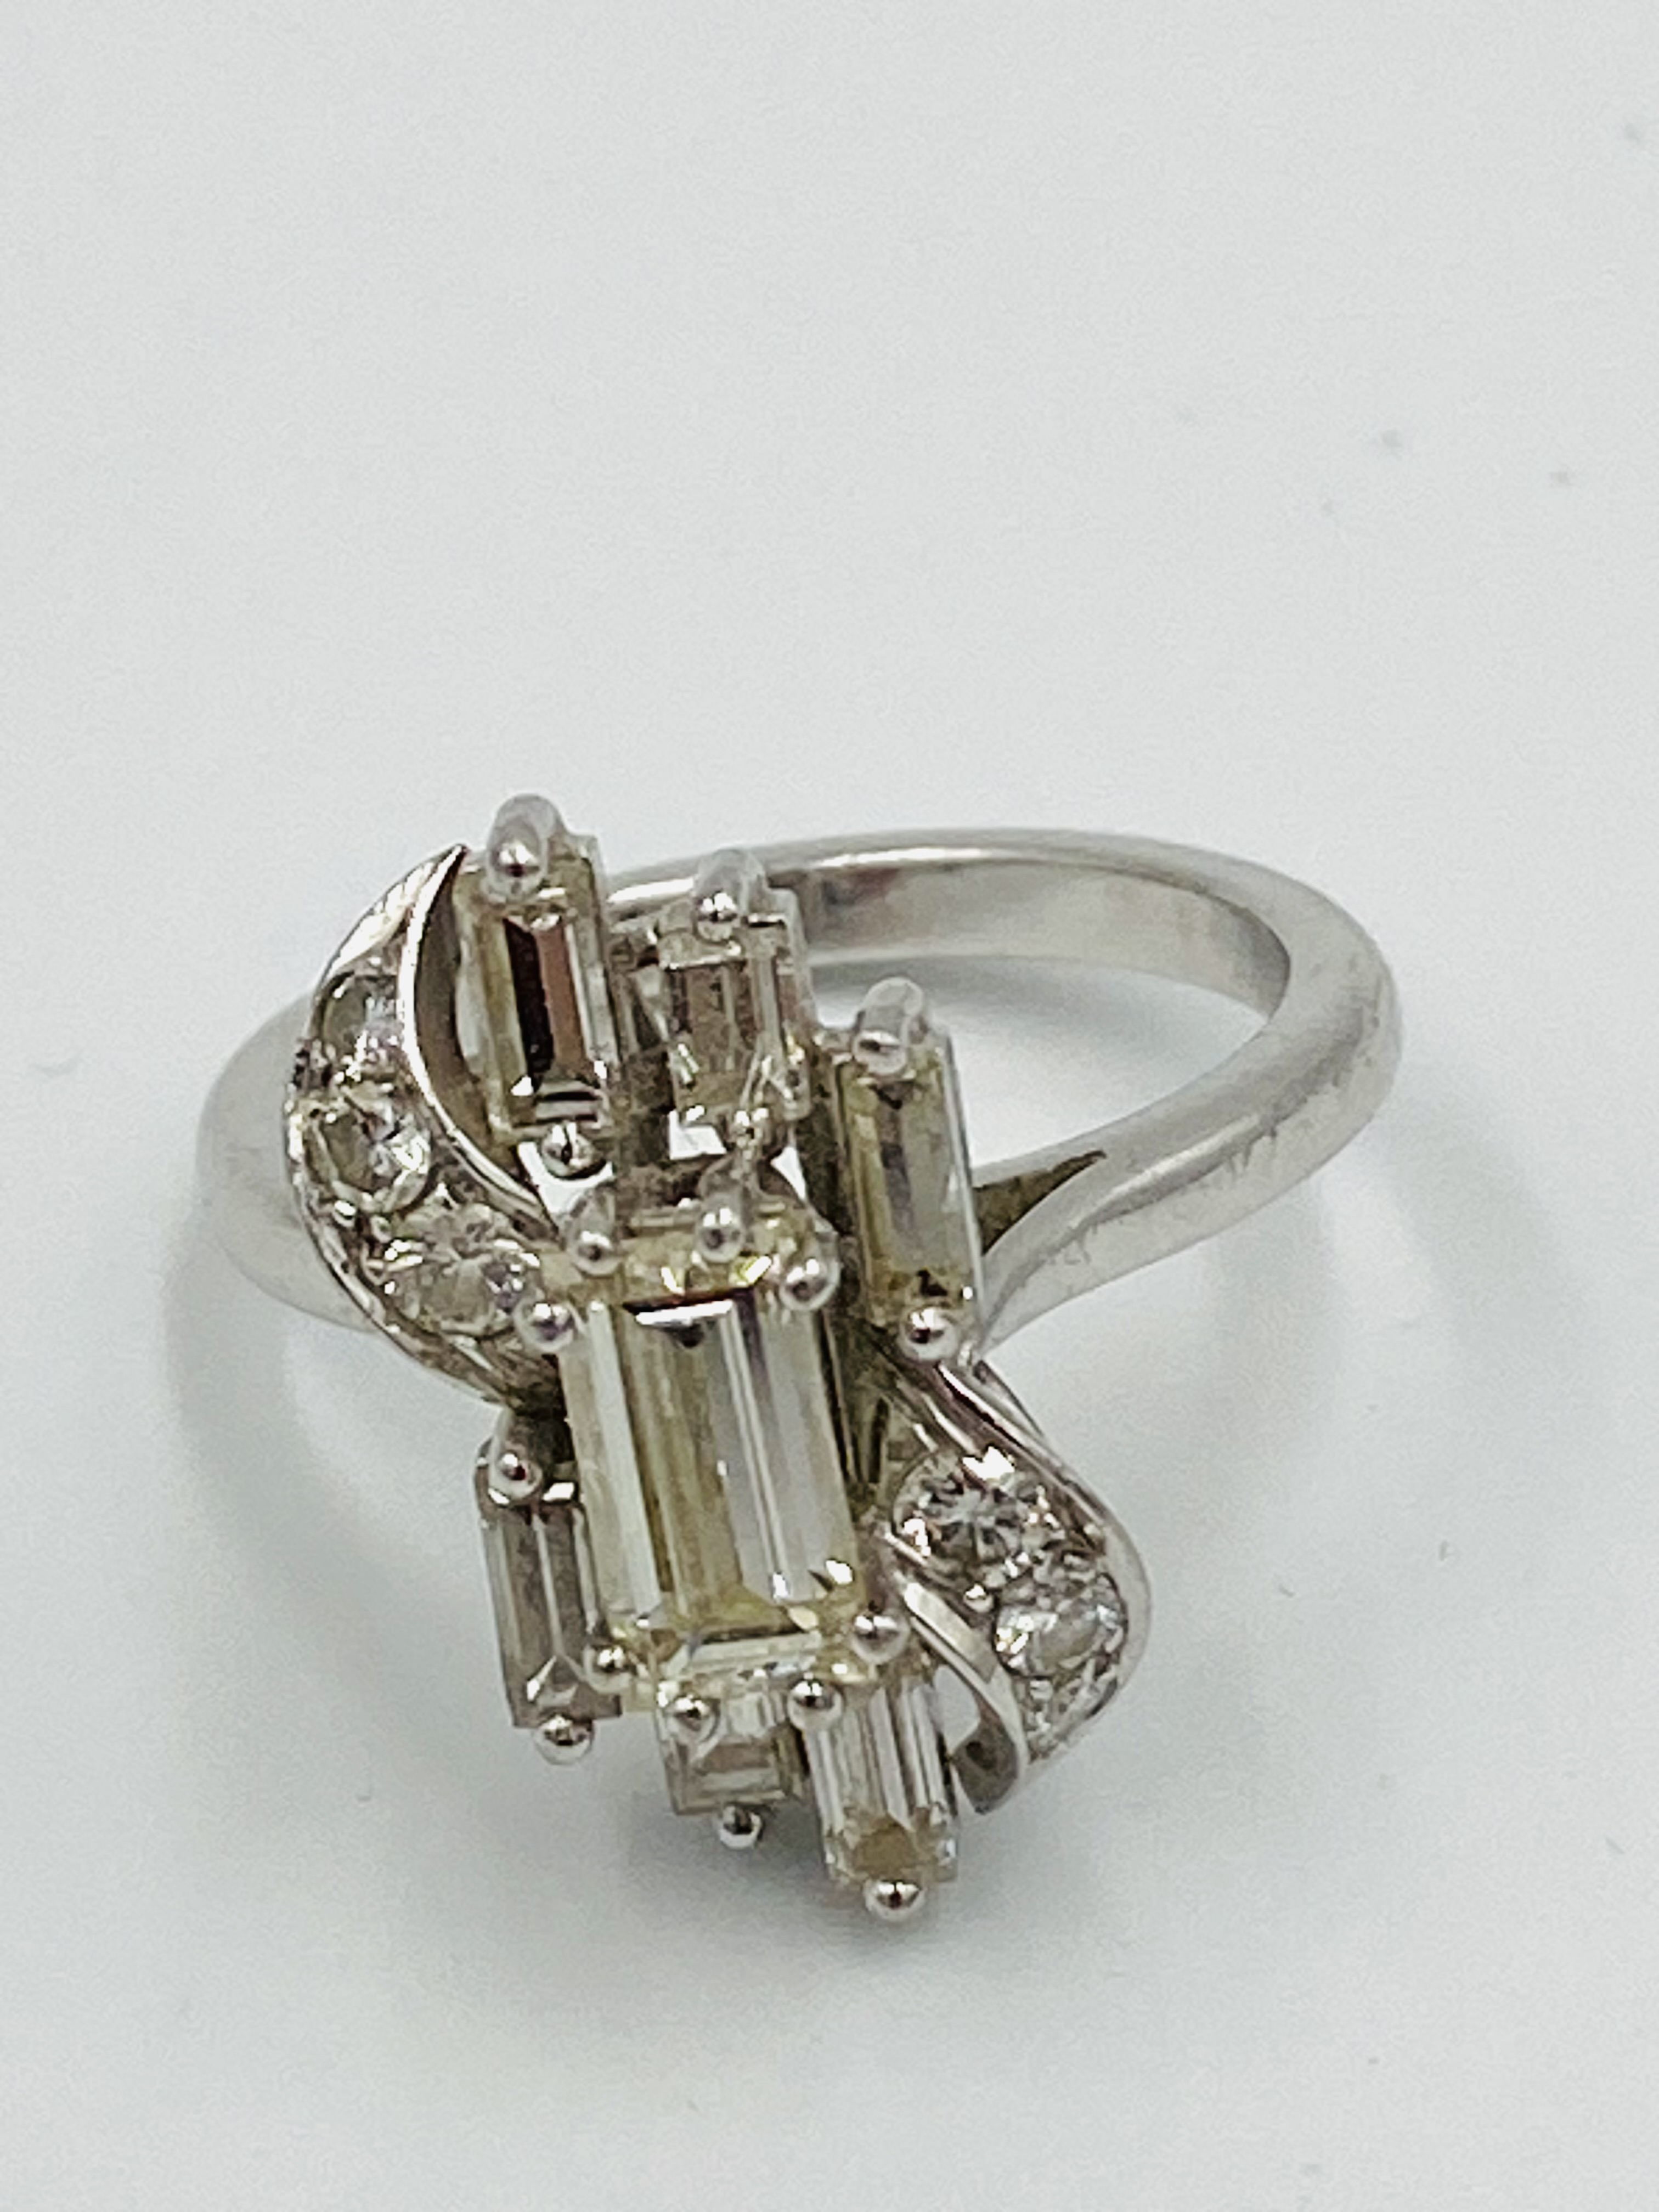 18ct white gold and diamond cocktail ring - Image 2 of 5